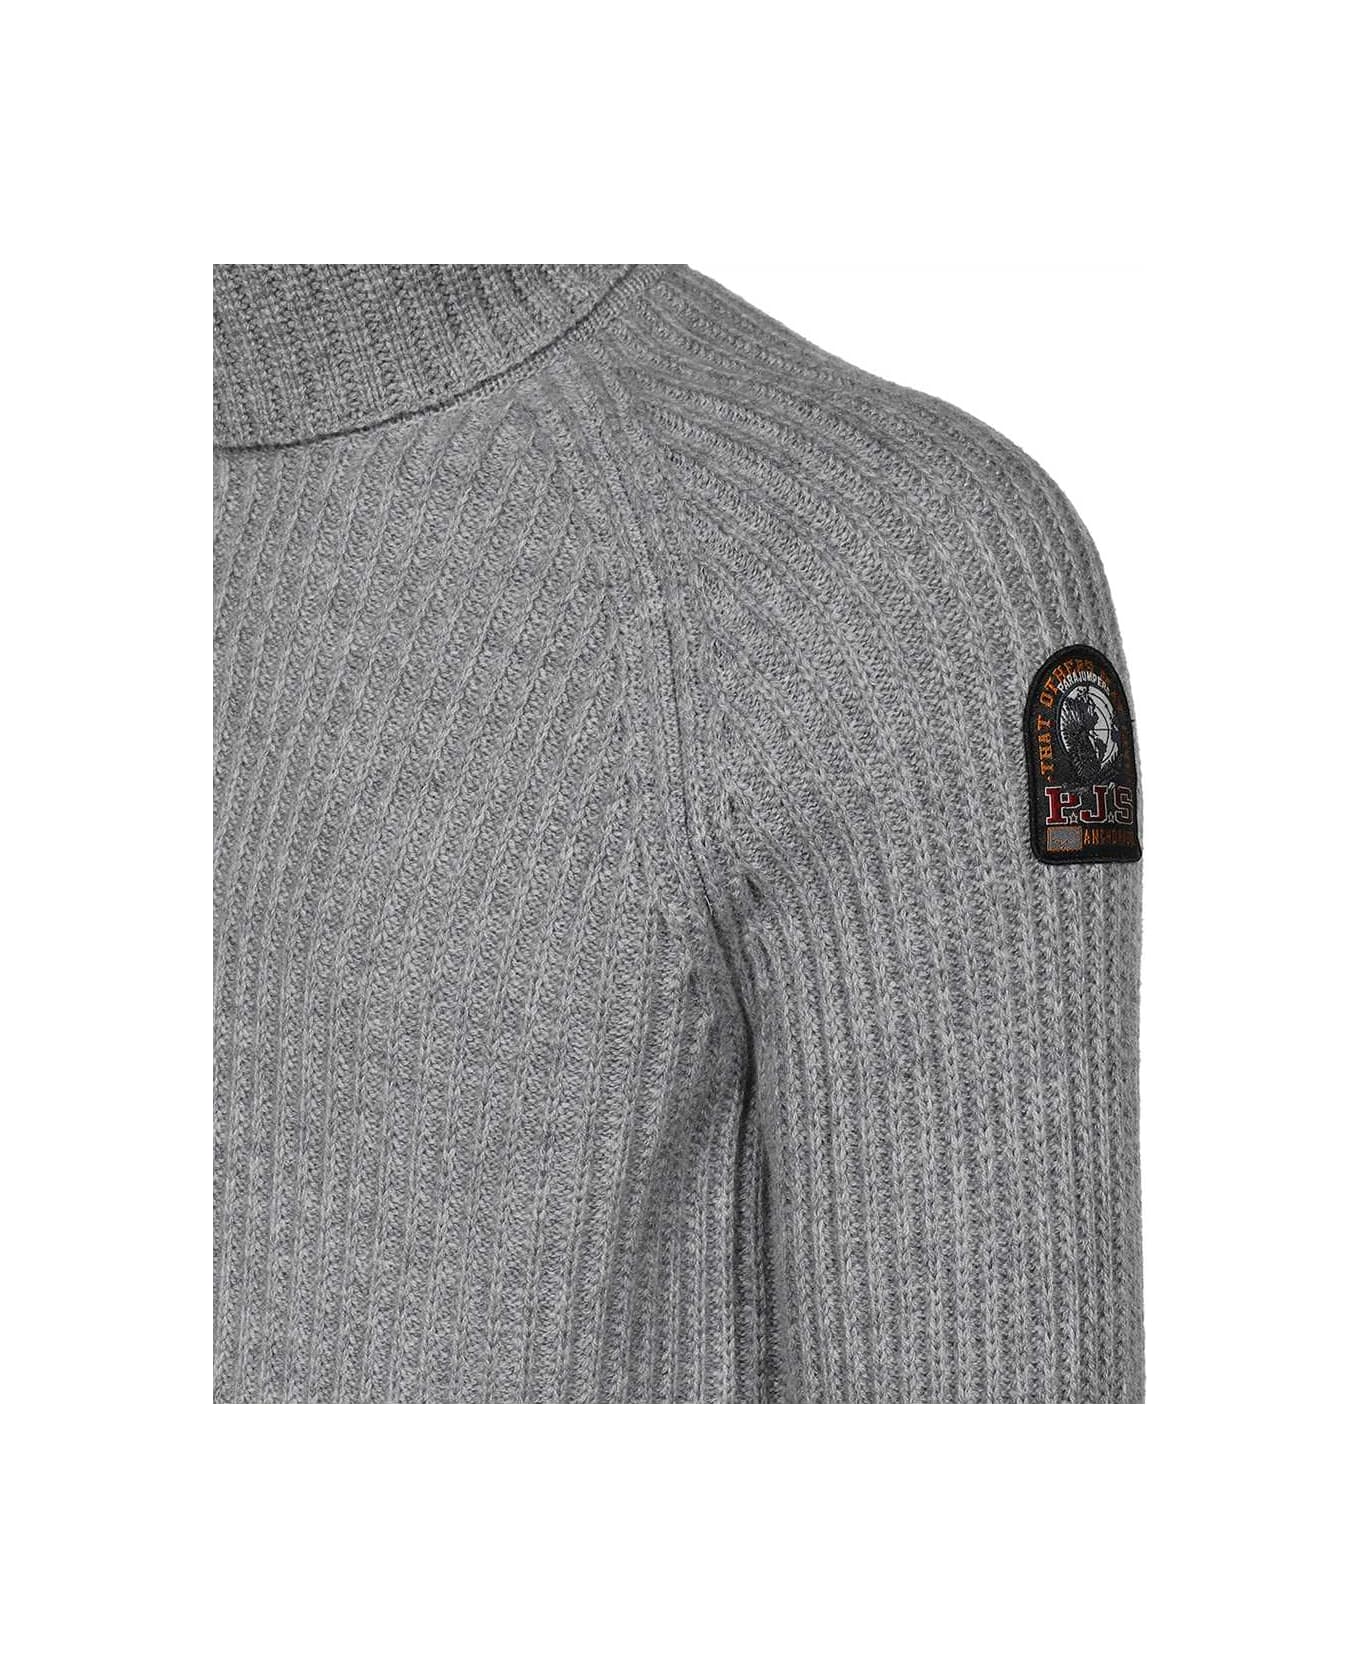 Parajumpers Wool Turtleneck Sweater - grey